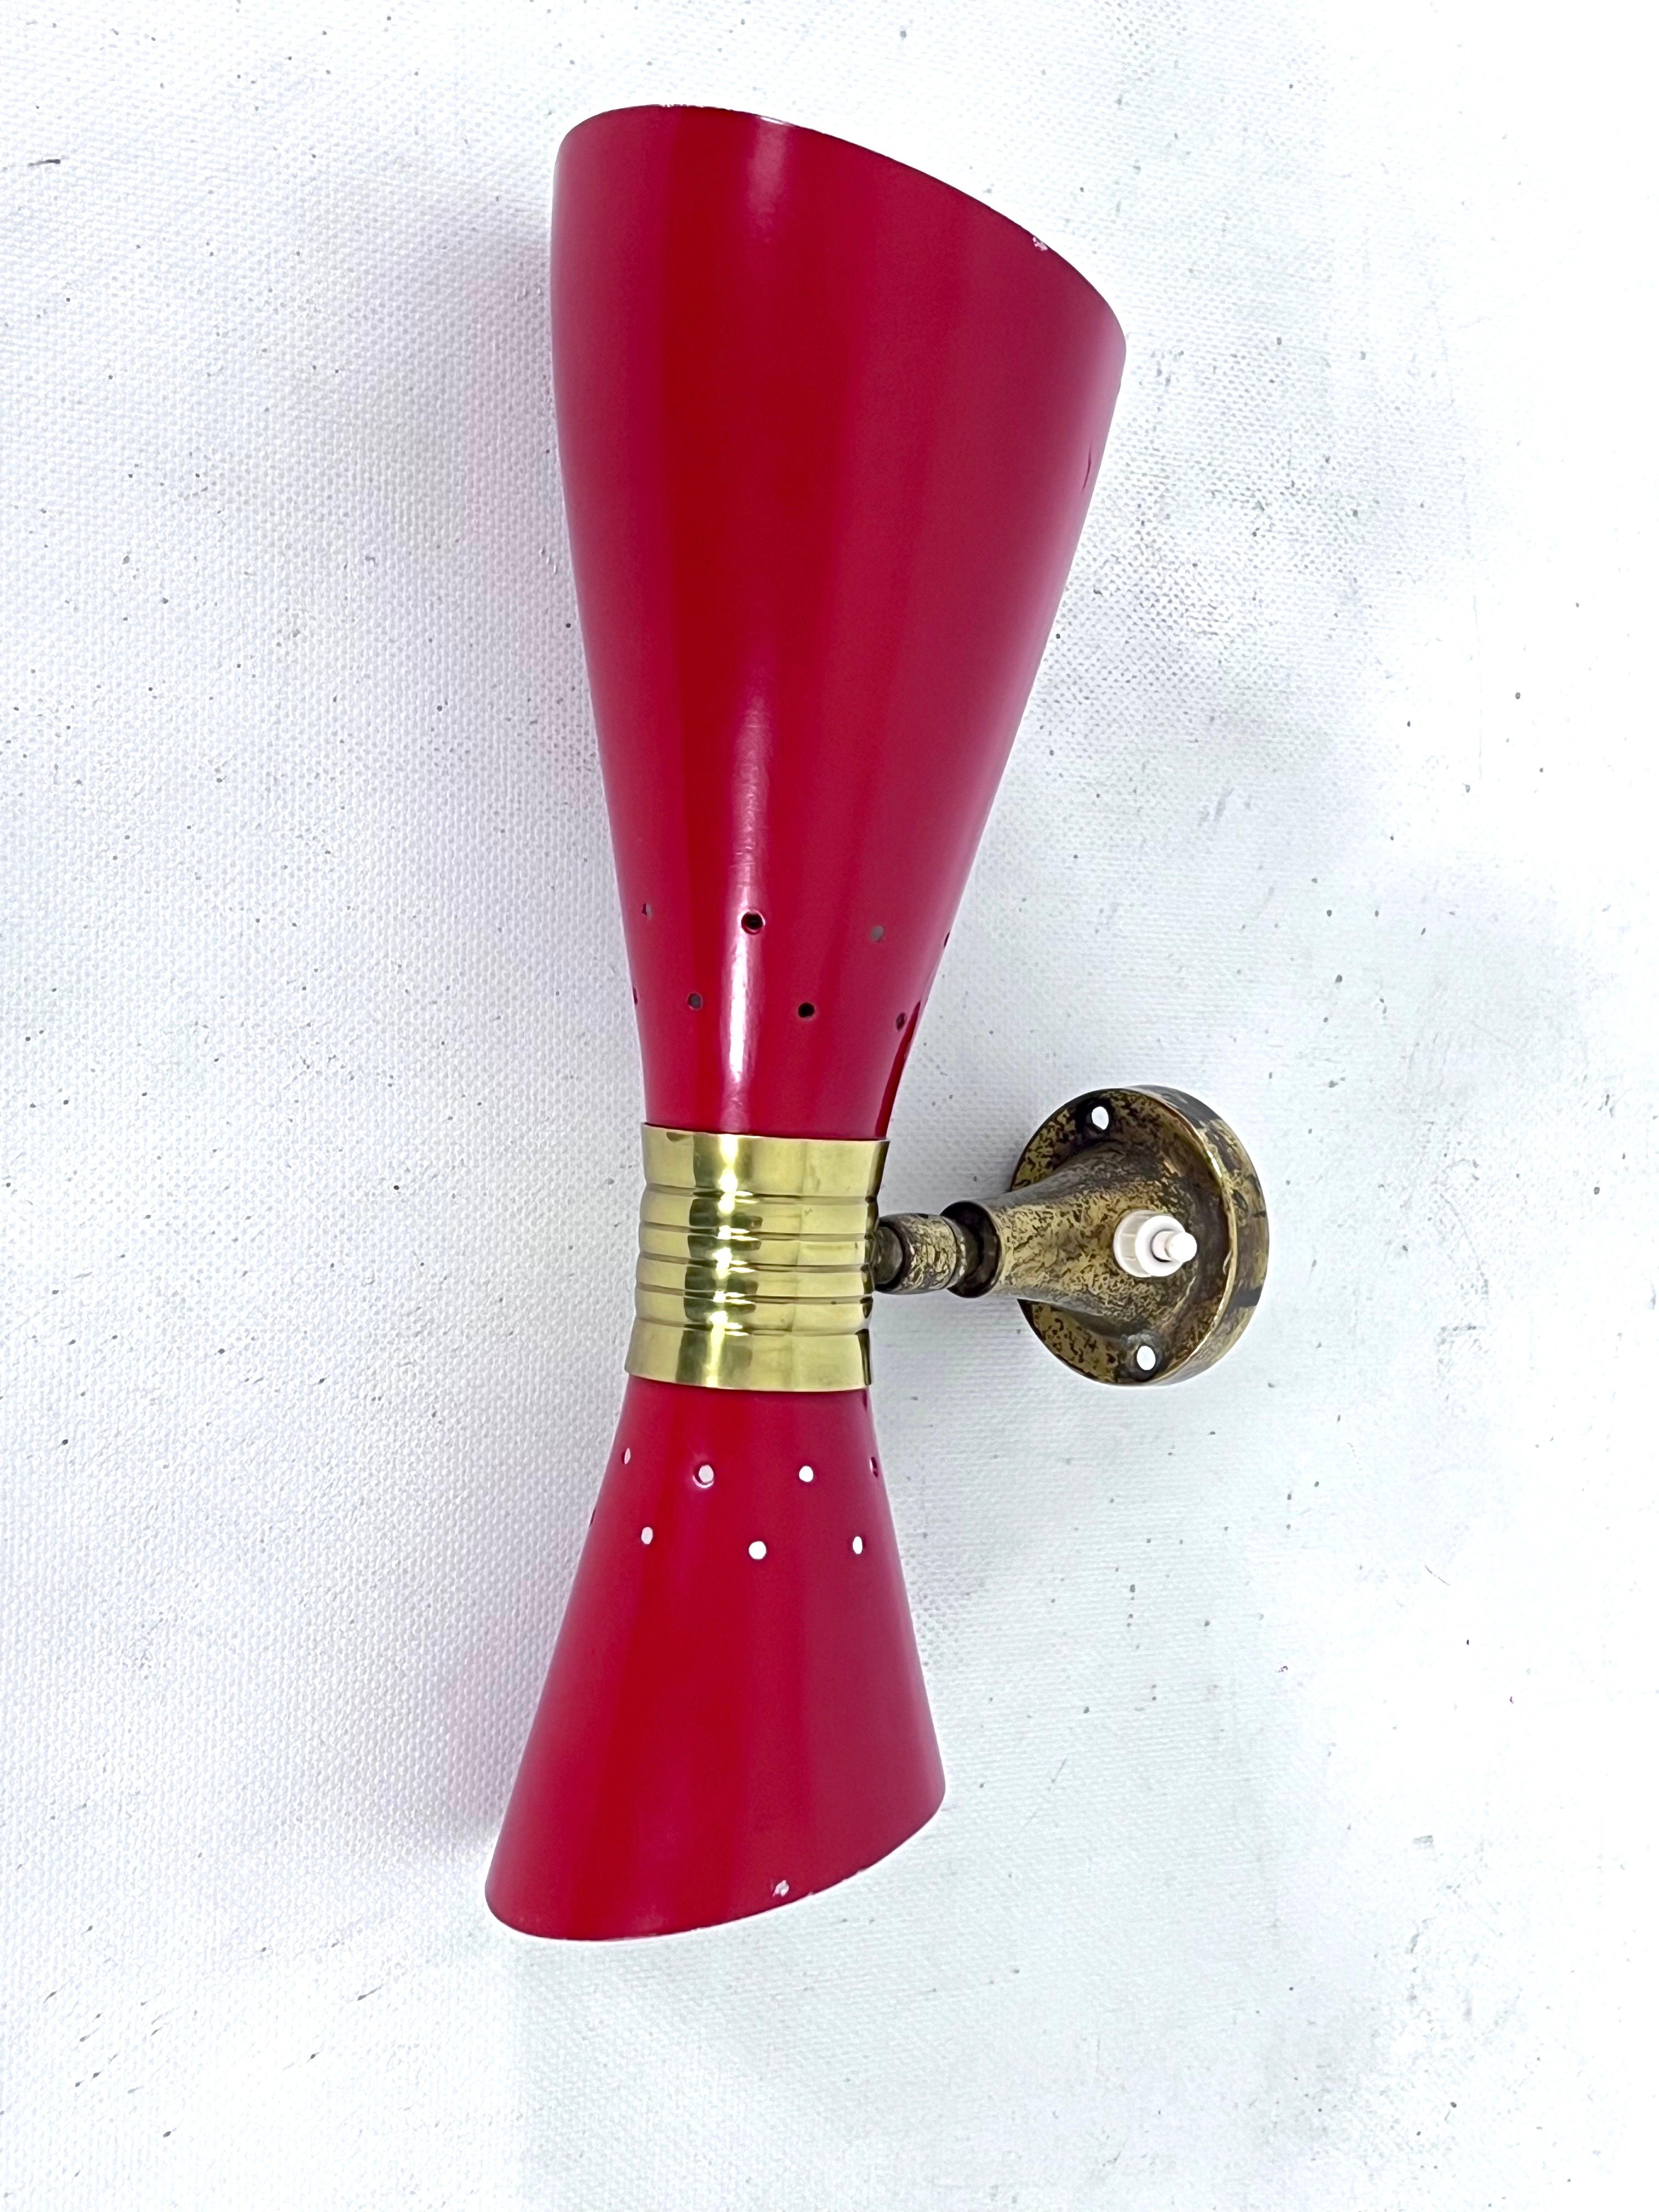 Italian Midcentury Single Double Cones Wall Lamp by Stilnovo, 1950s For Sale 4